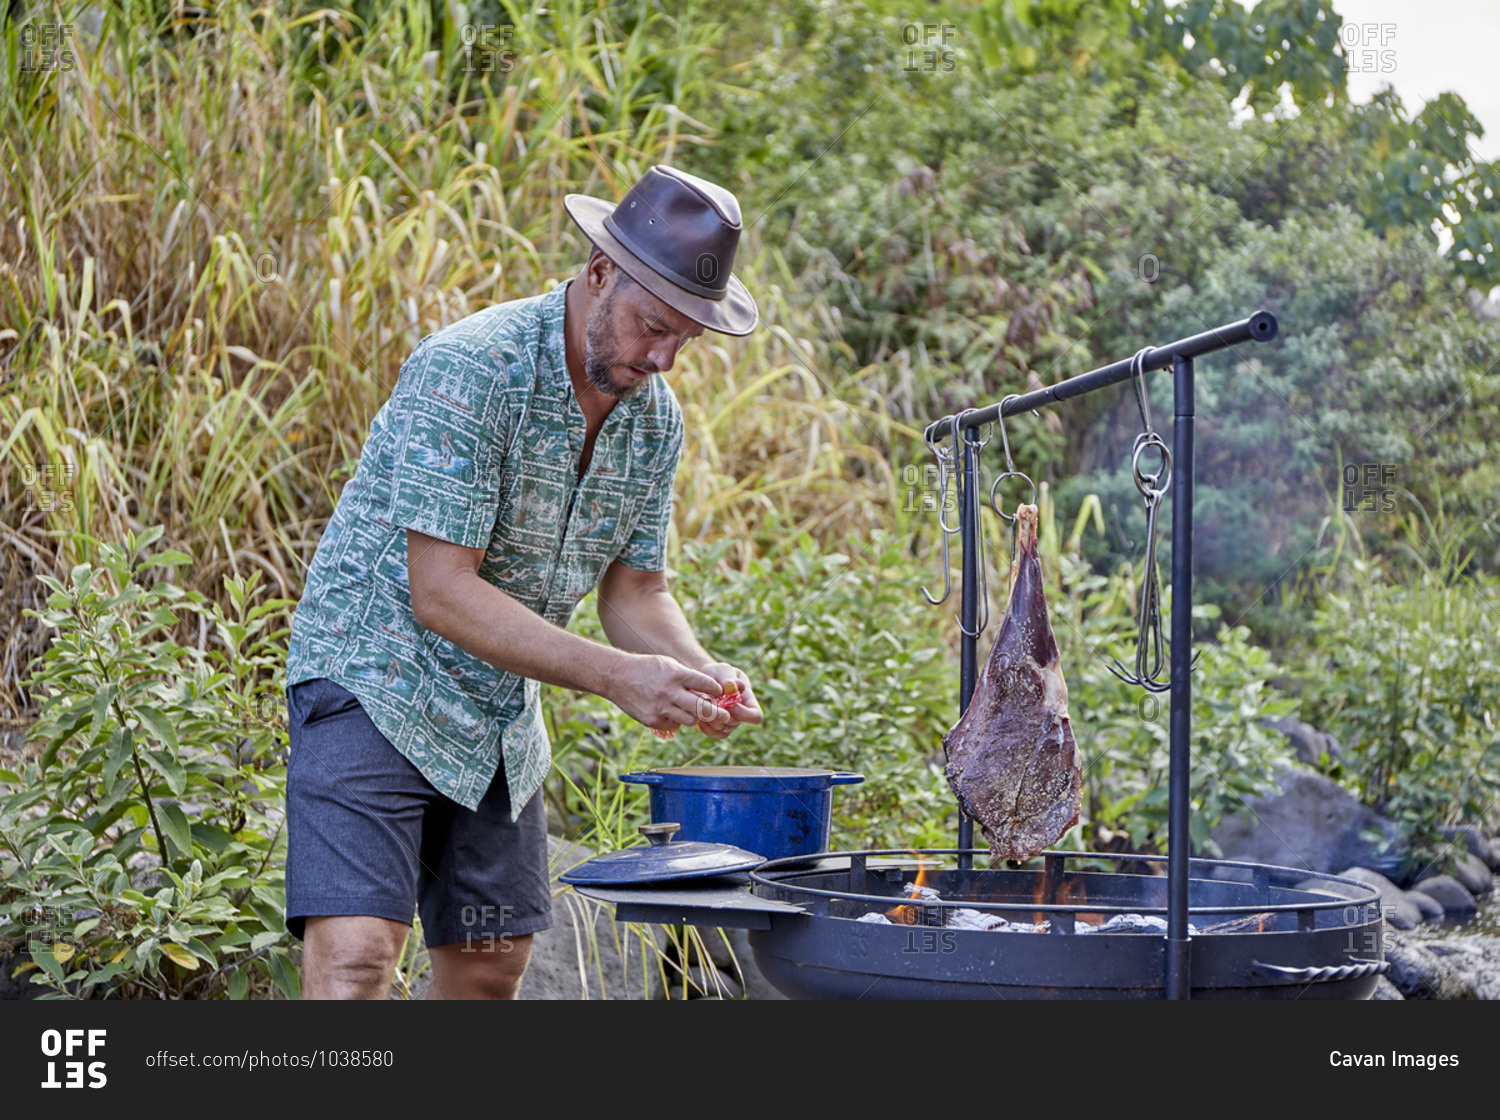 Chef Cooking over Open Flame at Campsite Along Streambed